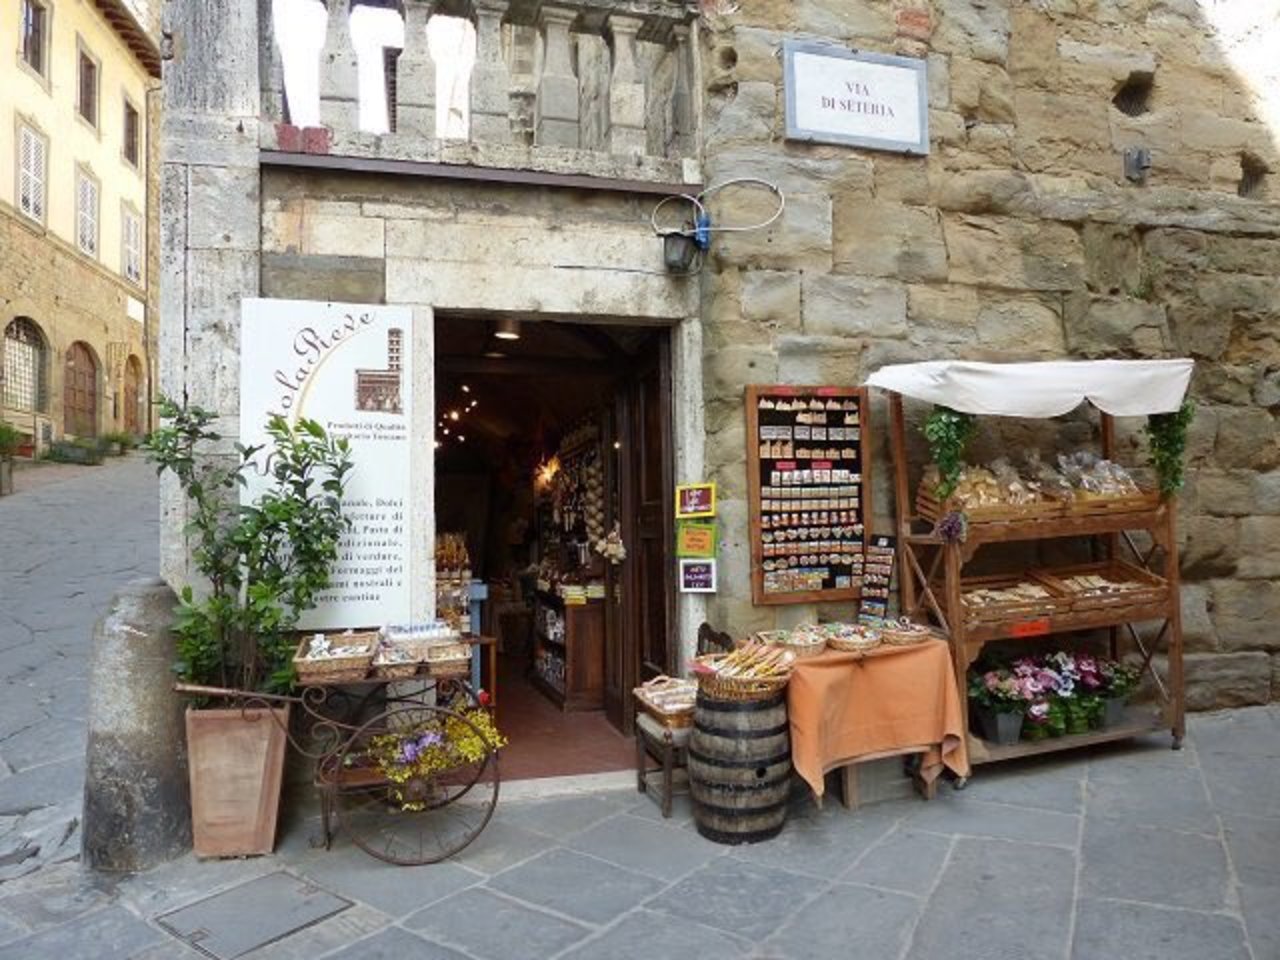 Enjoy Arezzo, a delightful Tuscan town without the crowds #Arezzo #Tuscany http://goo.gl/NExW1v #italy https://t.co/MLoZXuocur